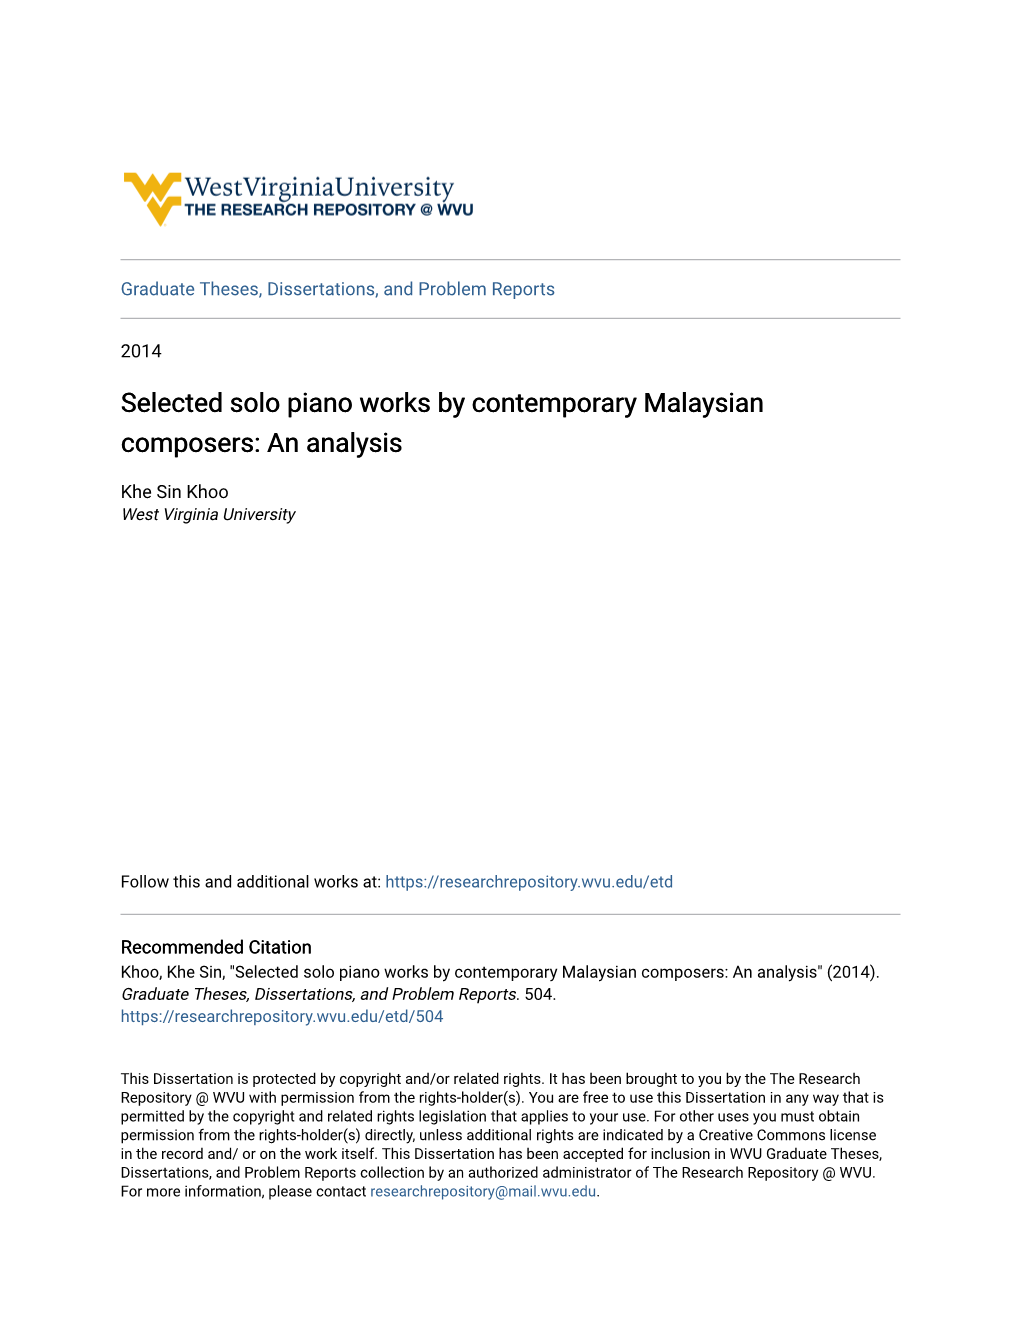 Selected Solo Piano Works by Contemporary Malaysian Composers: an Analysis